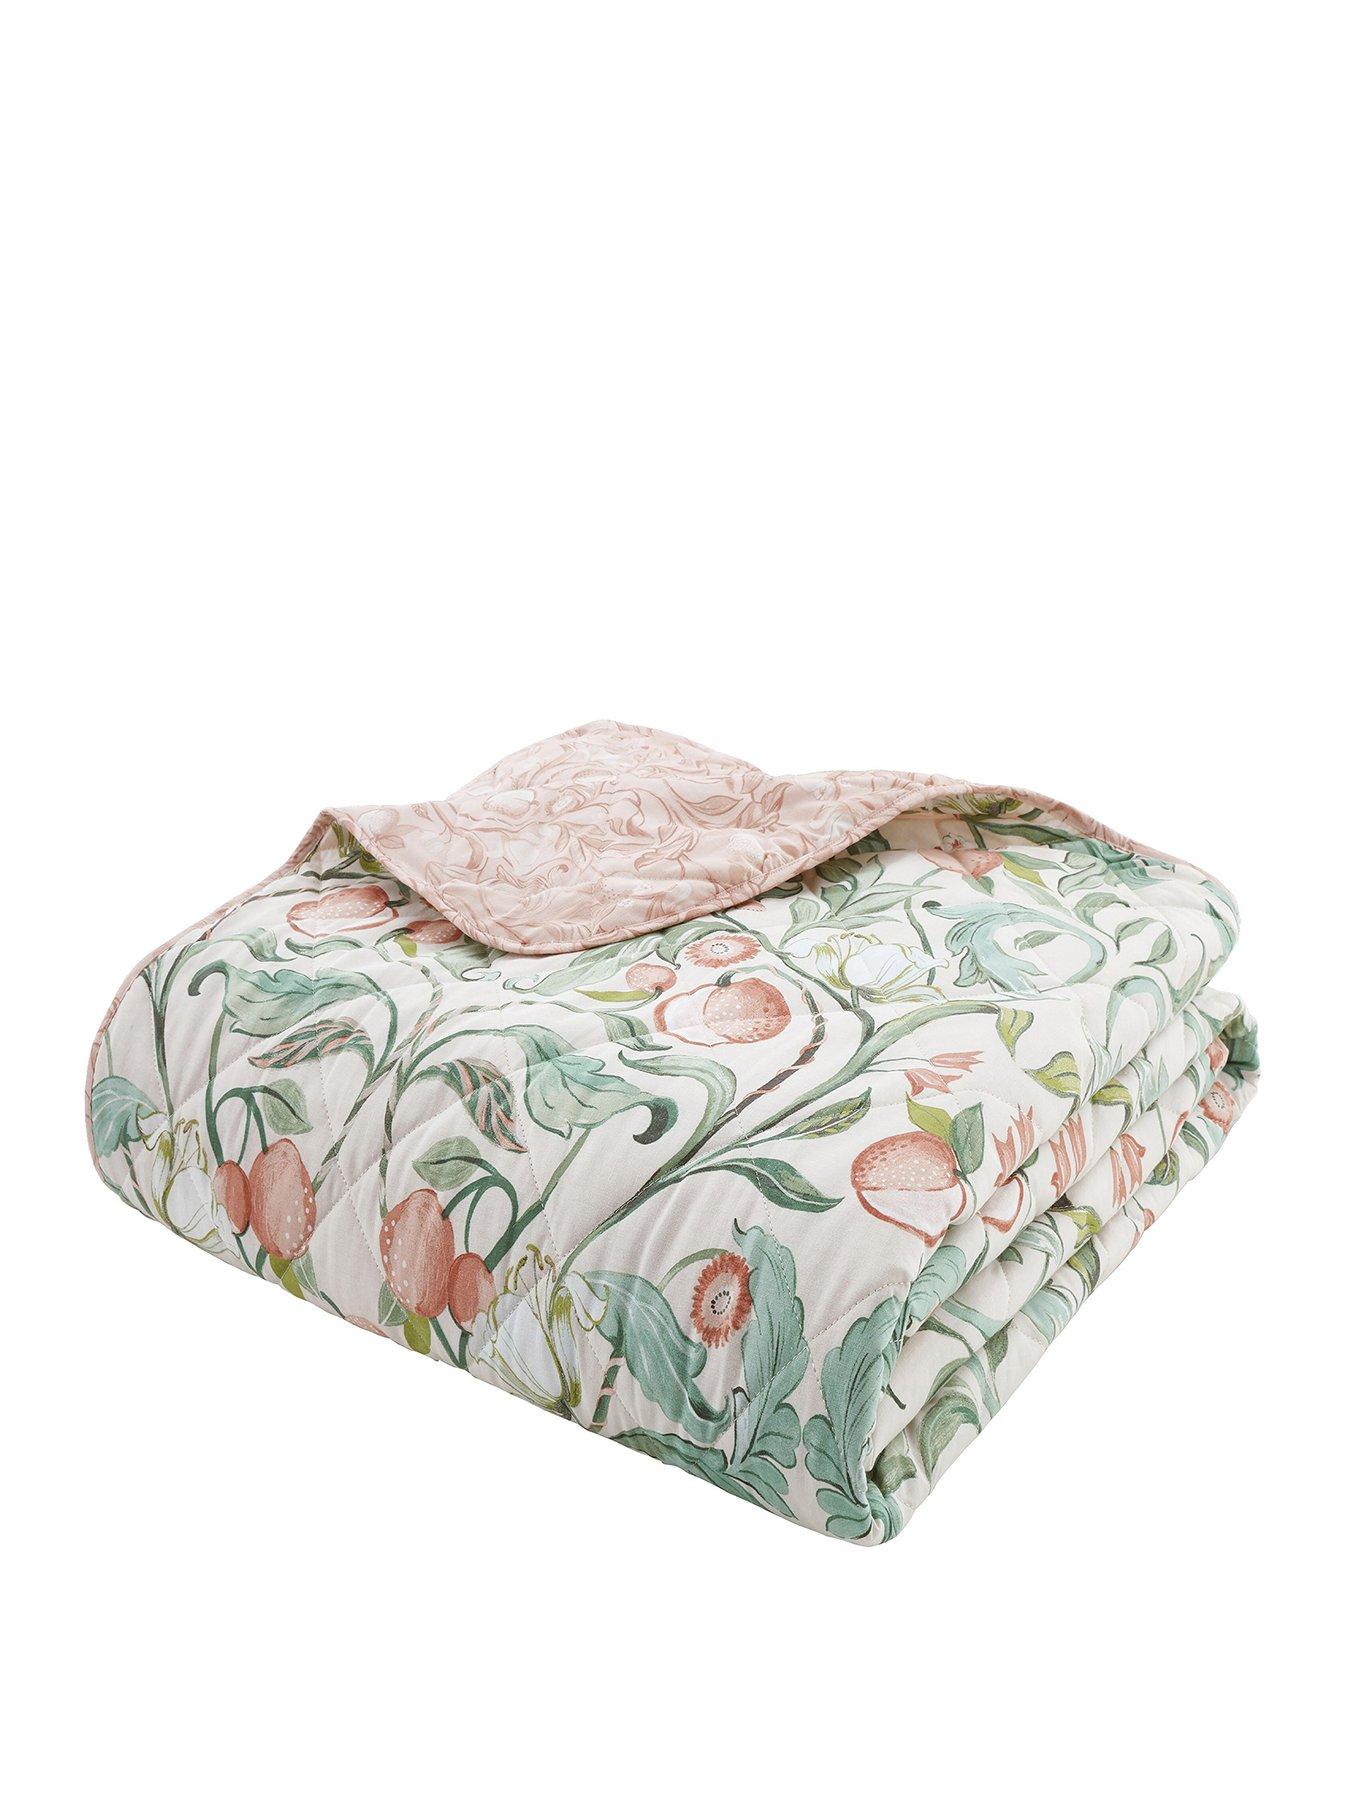 Catherine Lansfield Clarence Floral Bedspread Throw | littlewoods.com